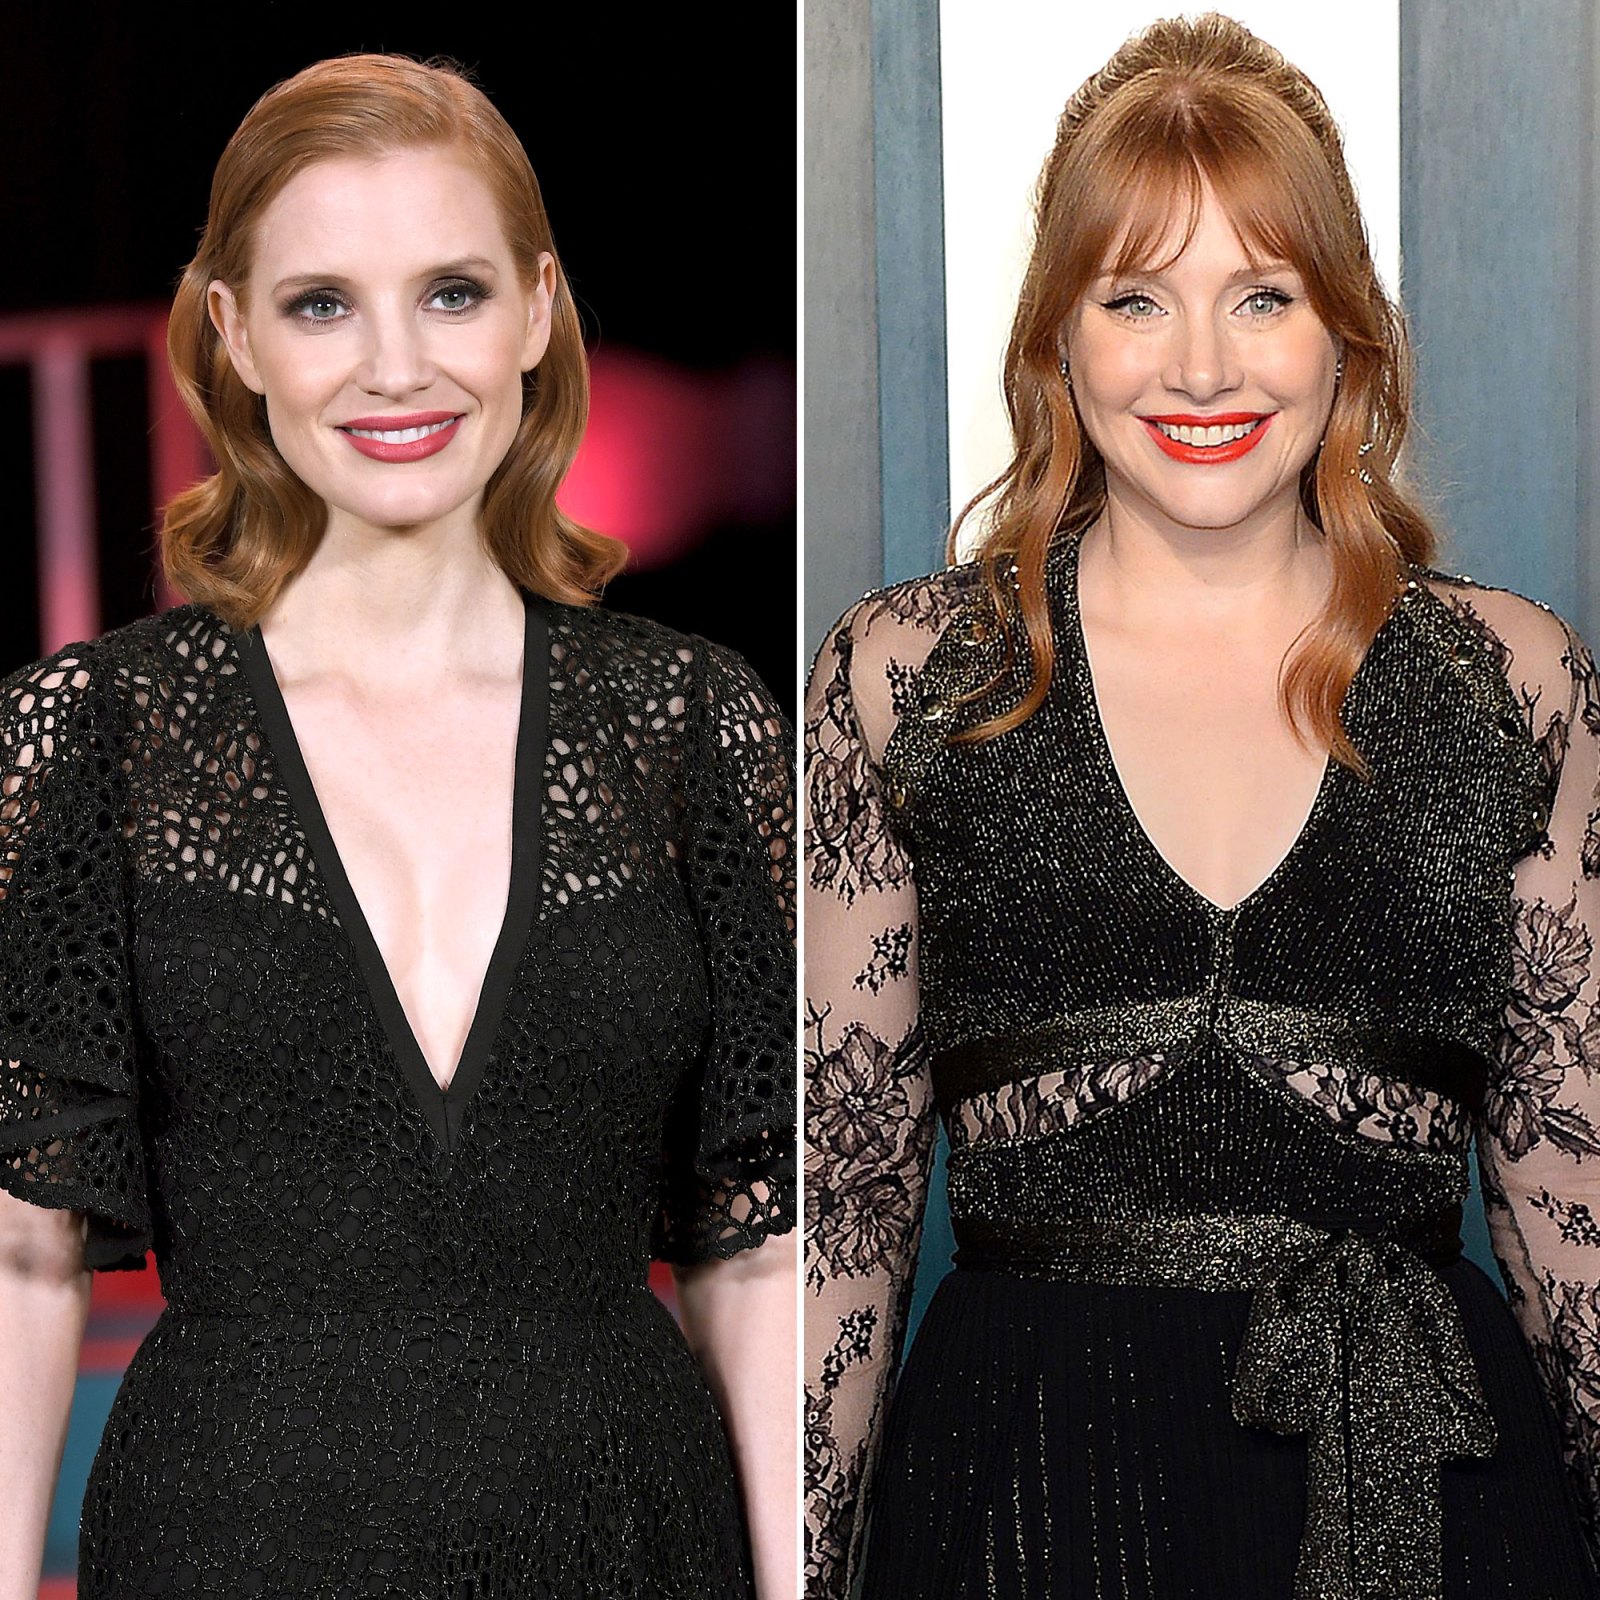 Jessica Chastain ‘sick Of Being Mistaken For Bryce Dallas Howard